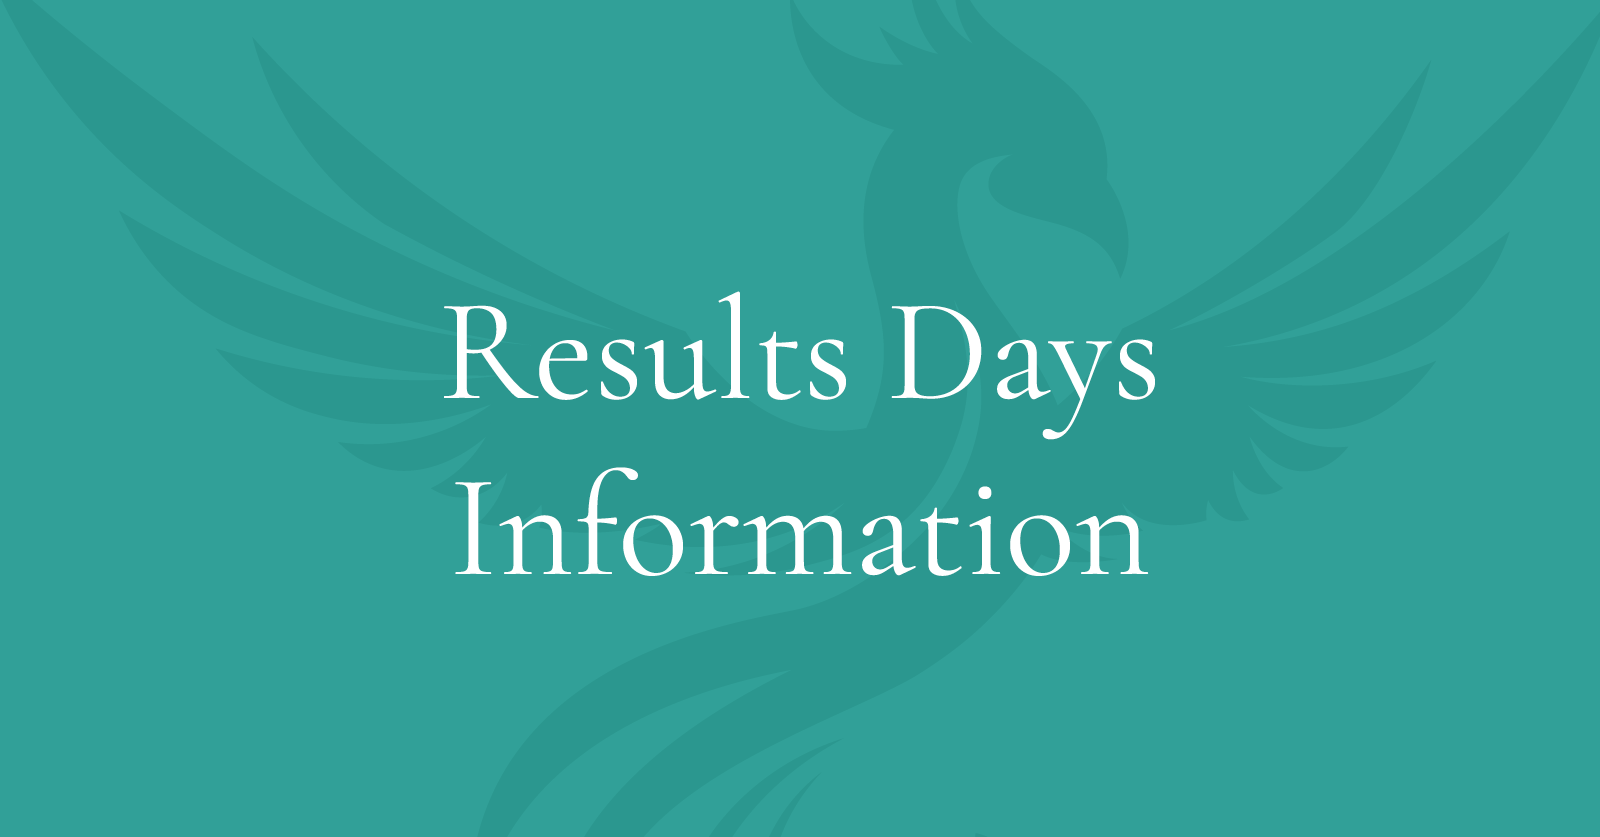 Featured Image for “Results Days Information”